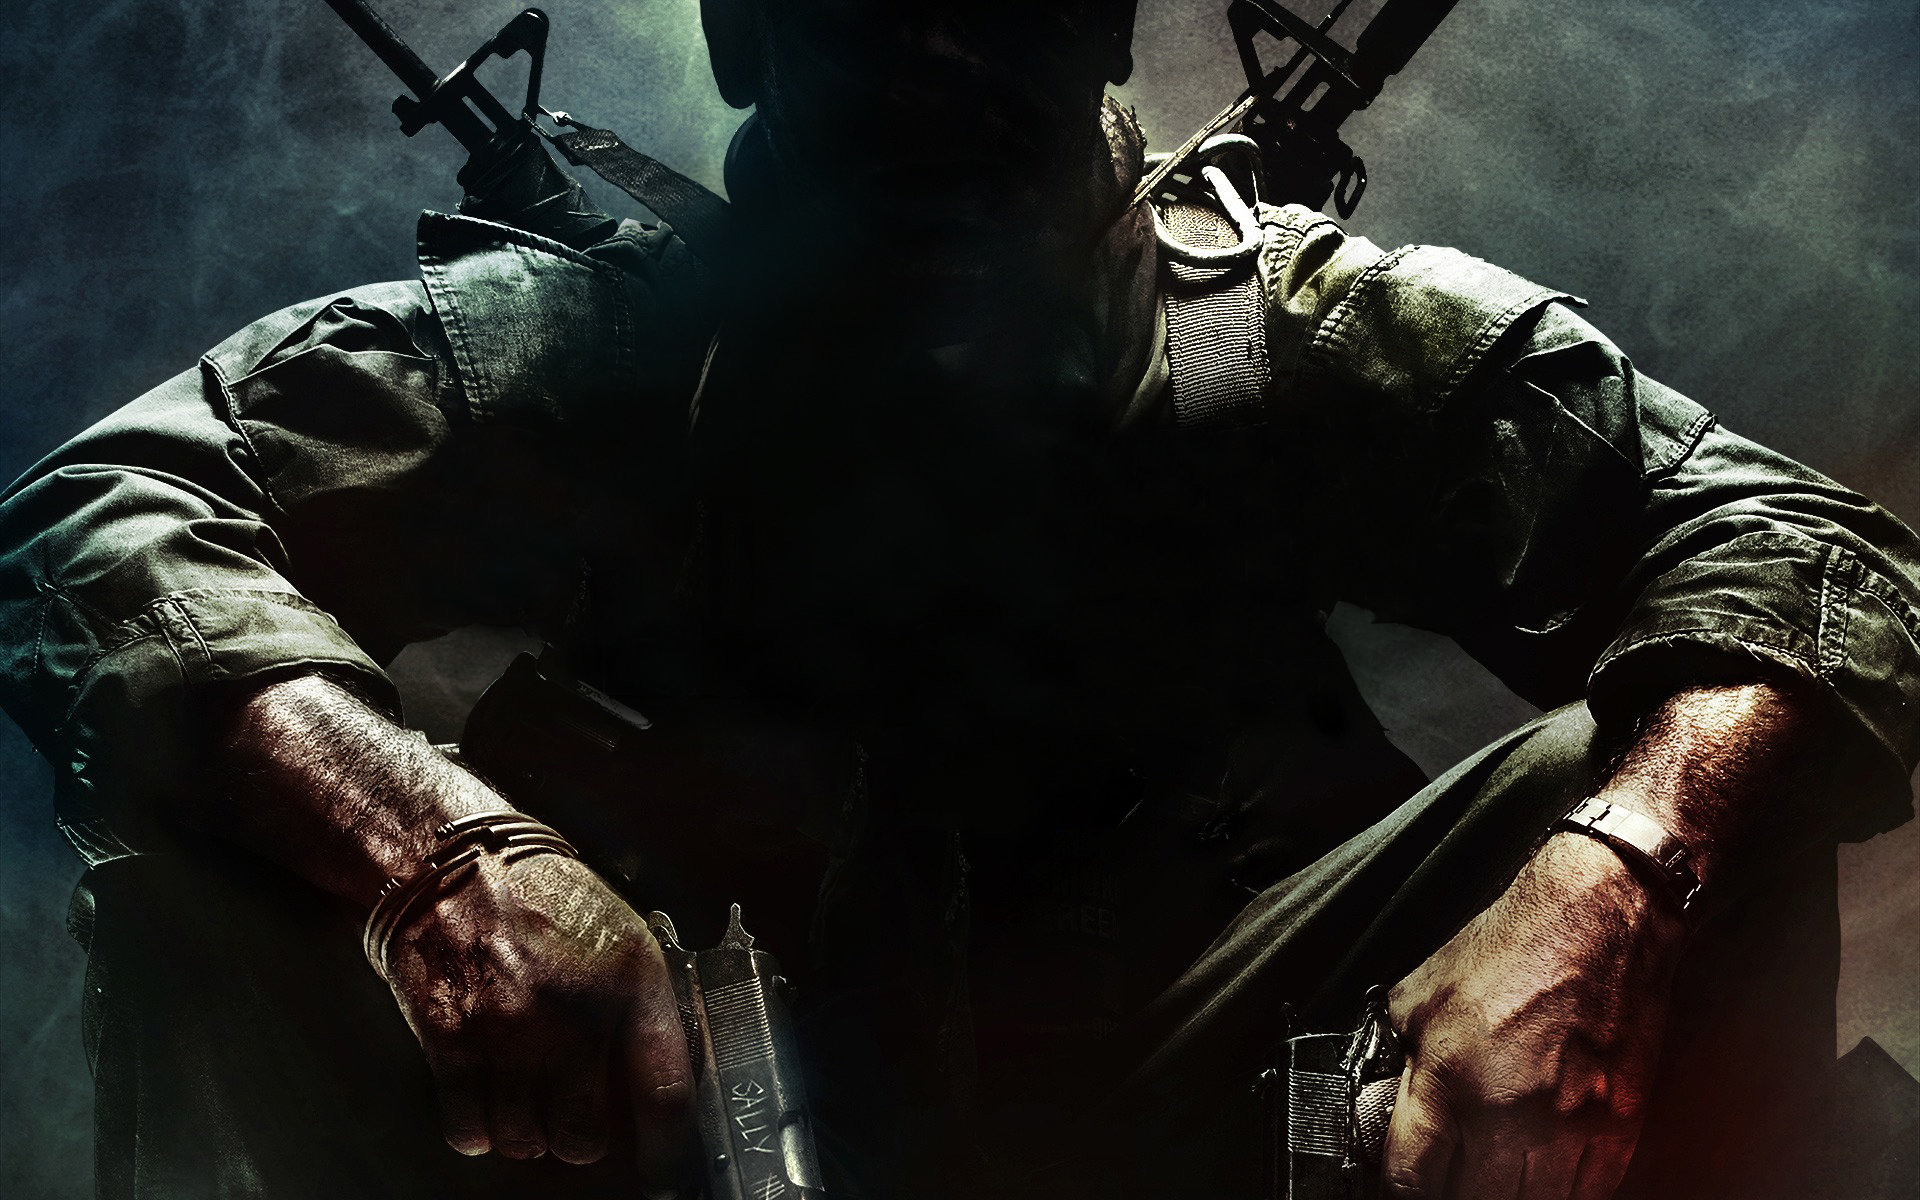 Best Call Of Duty: Black Ops wallpaper ID:70165 for High Resolution hd 1920x1200 computer